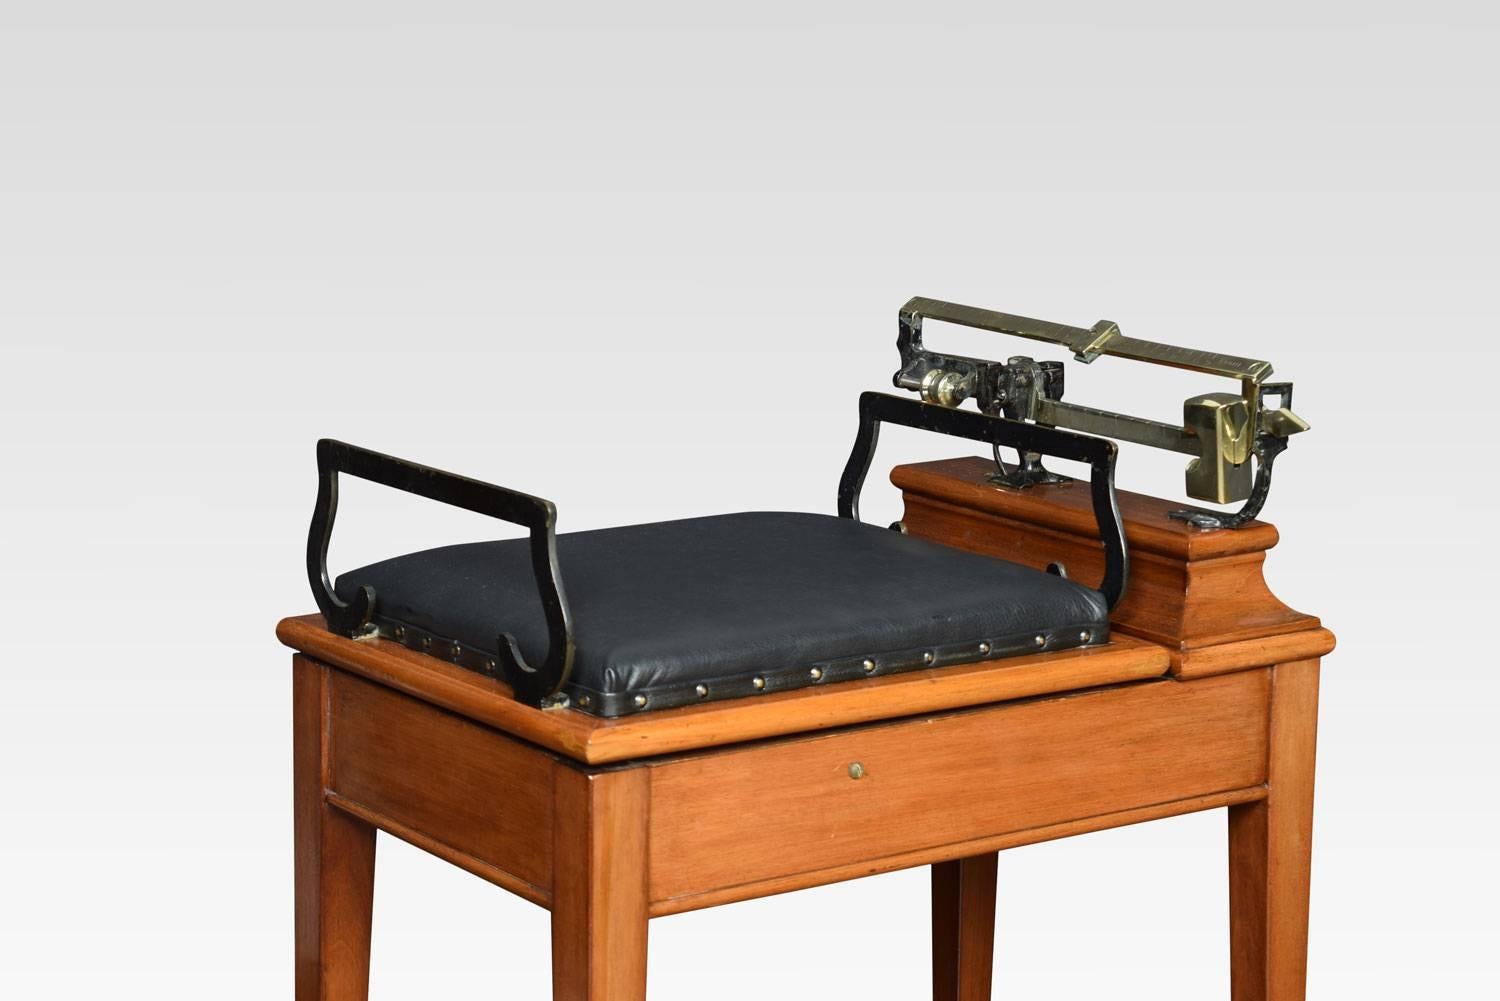 Set of 19th century Jockey scales. The black leather seat flanked by supports with brass weighing scales, raised on a moulded walnut frame and square section legs.
Dimensions:
Height 29 inches height to seat 24 Inches
Width 25.5 inches
Depth